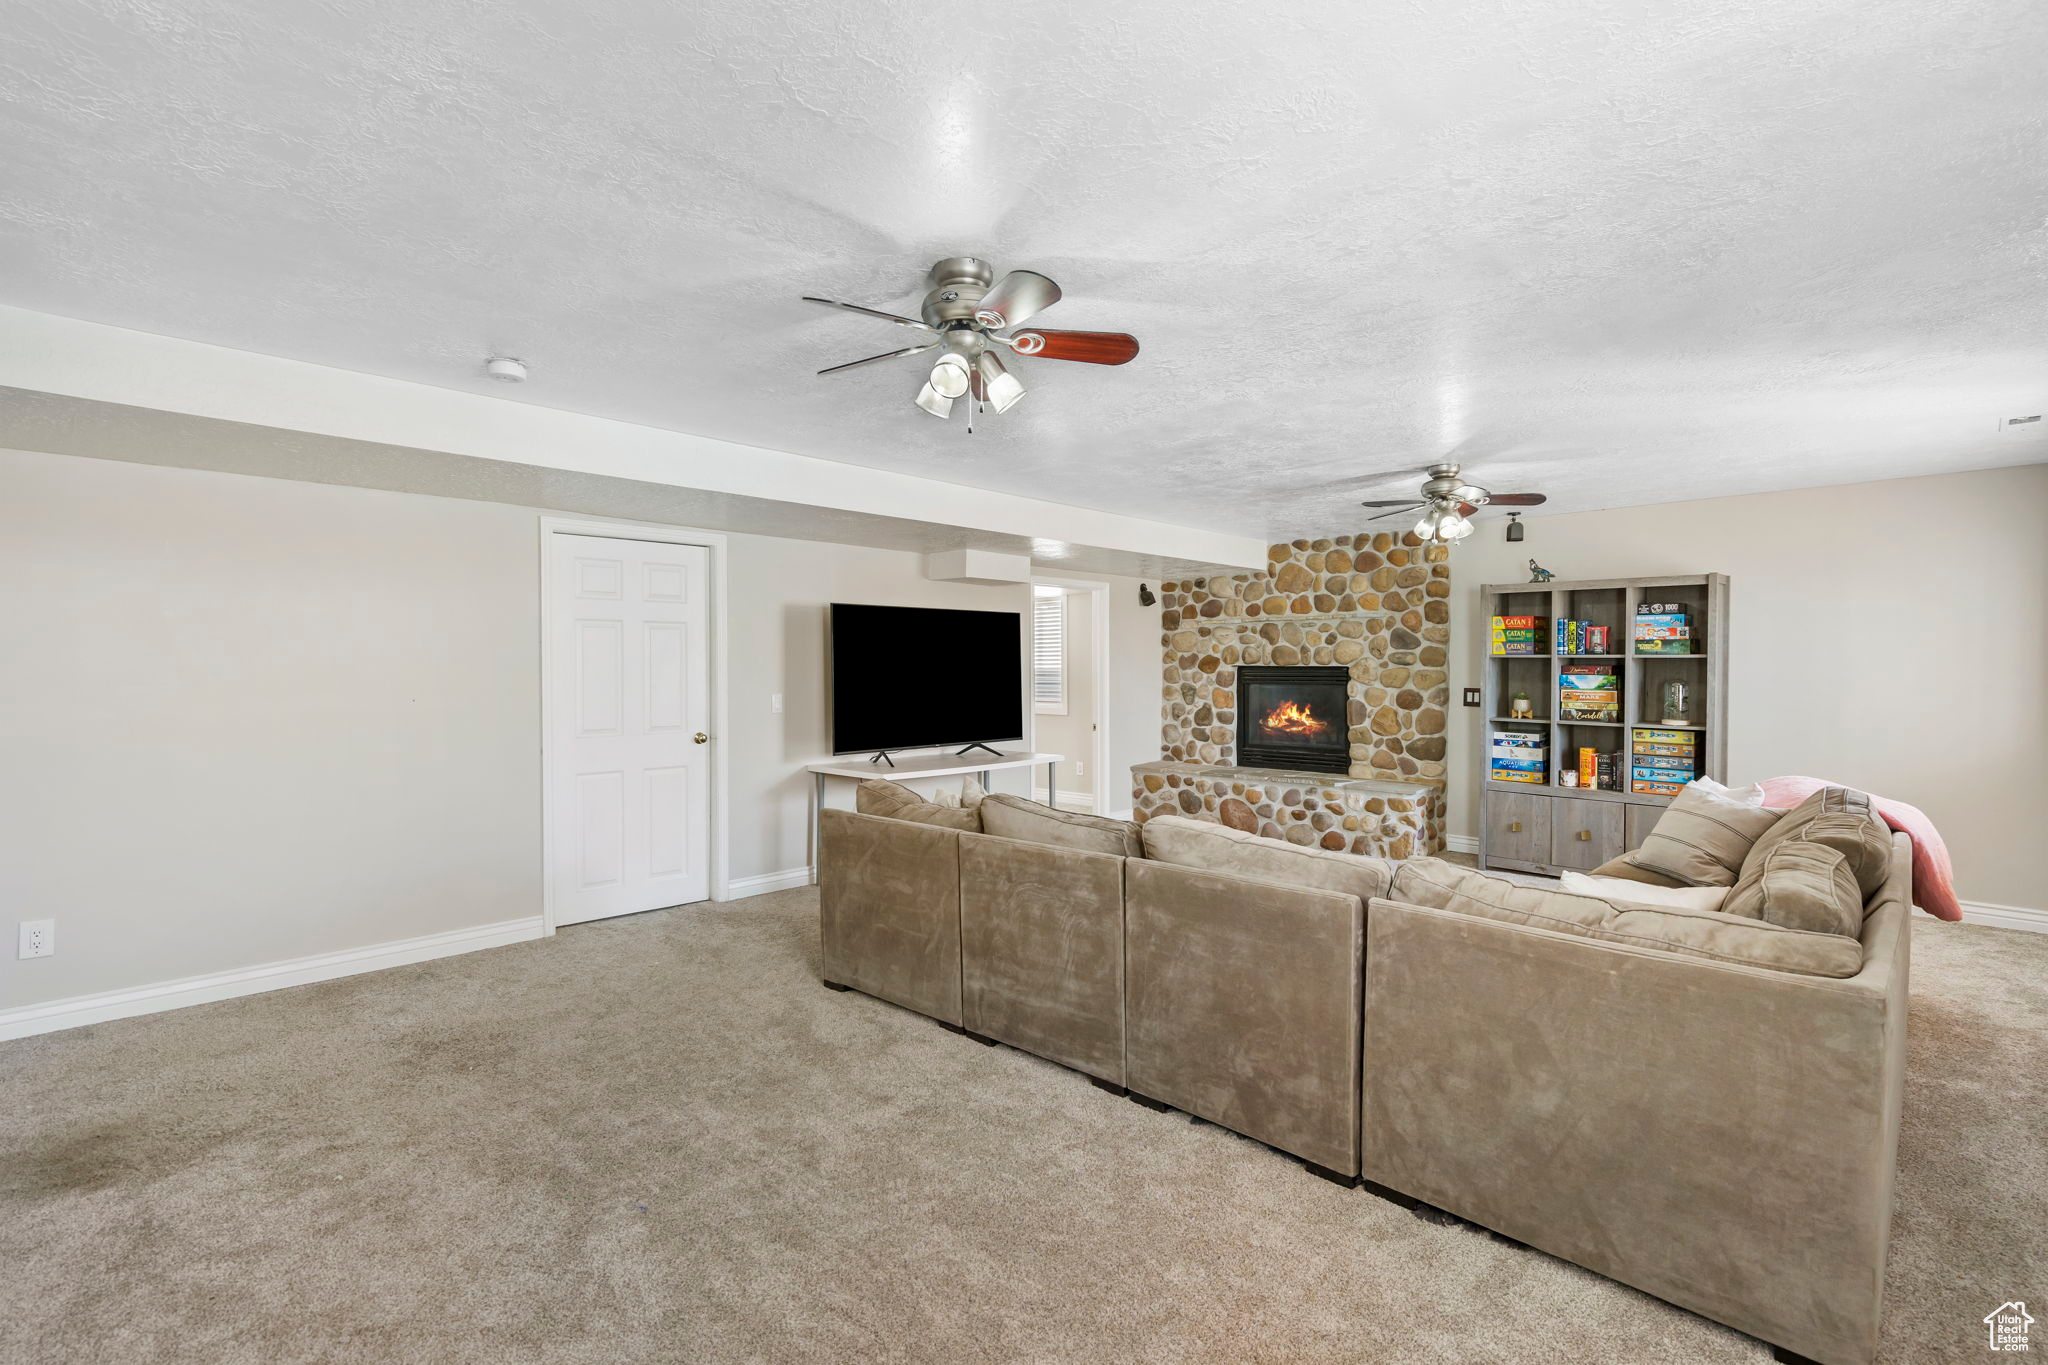 Living room featuring a stone fireplace, light colored carpet, ceiling fan, and a textured ceiling